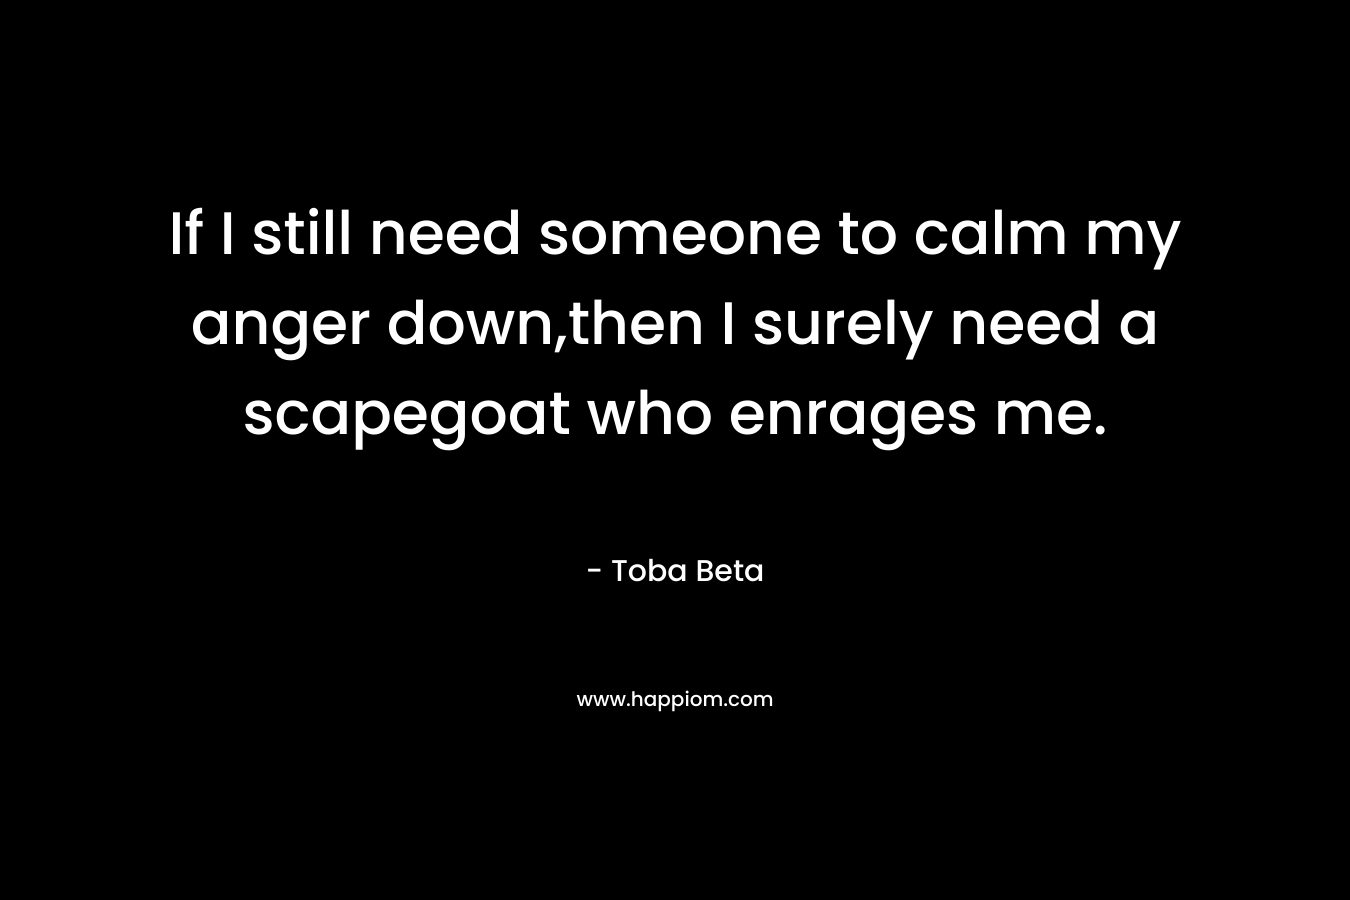 If I still need someone to calm my anger down,then I surely need a scapegoat who enrages me. – Toba Beta